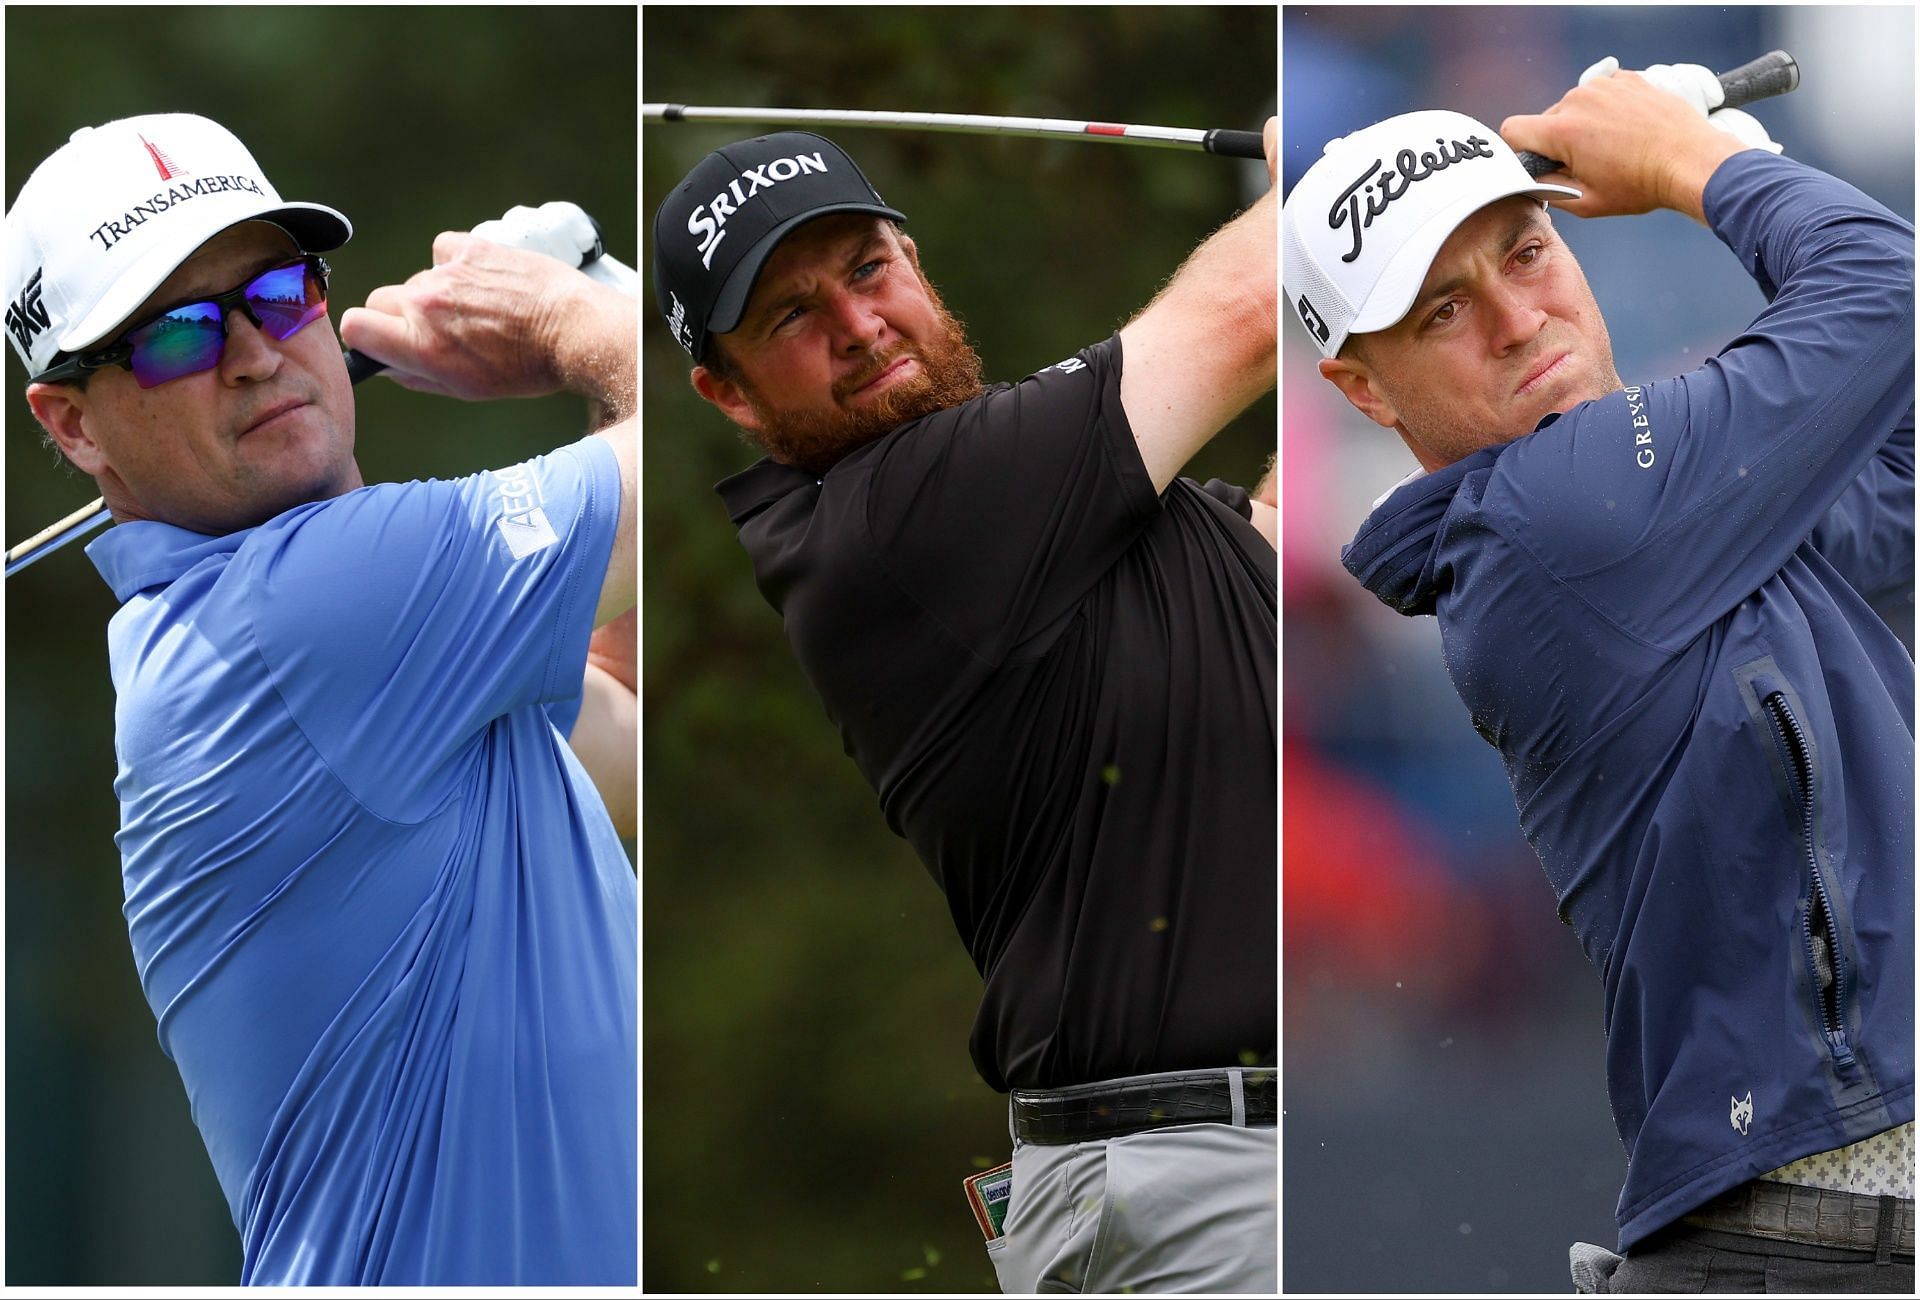 Zach Johnson, Shane Lowry, and Justin Thomas set to play at 2023 Wyndham Championship (via Getty Images)